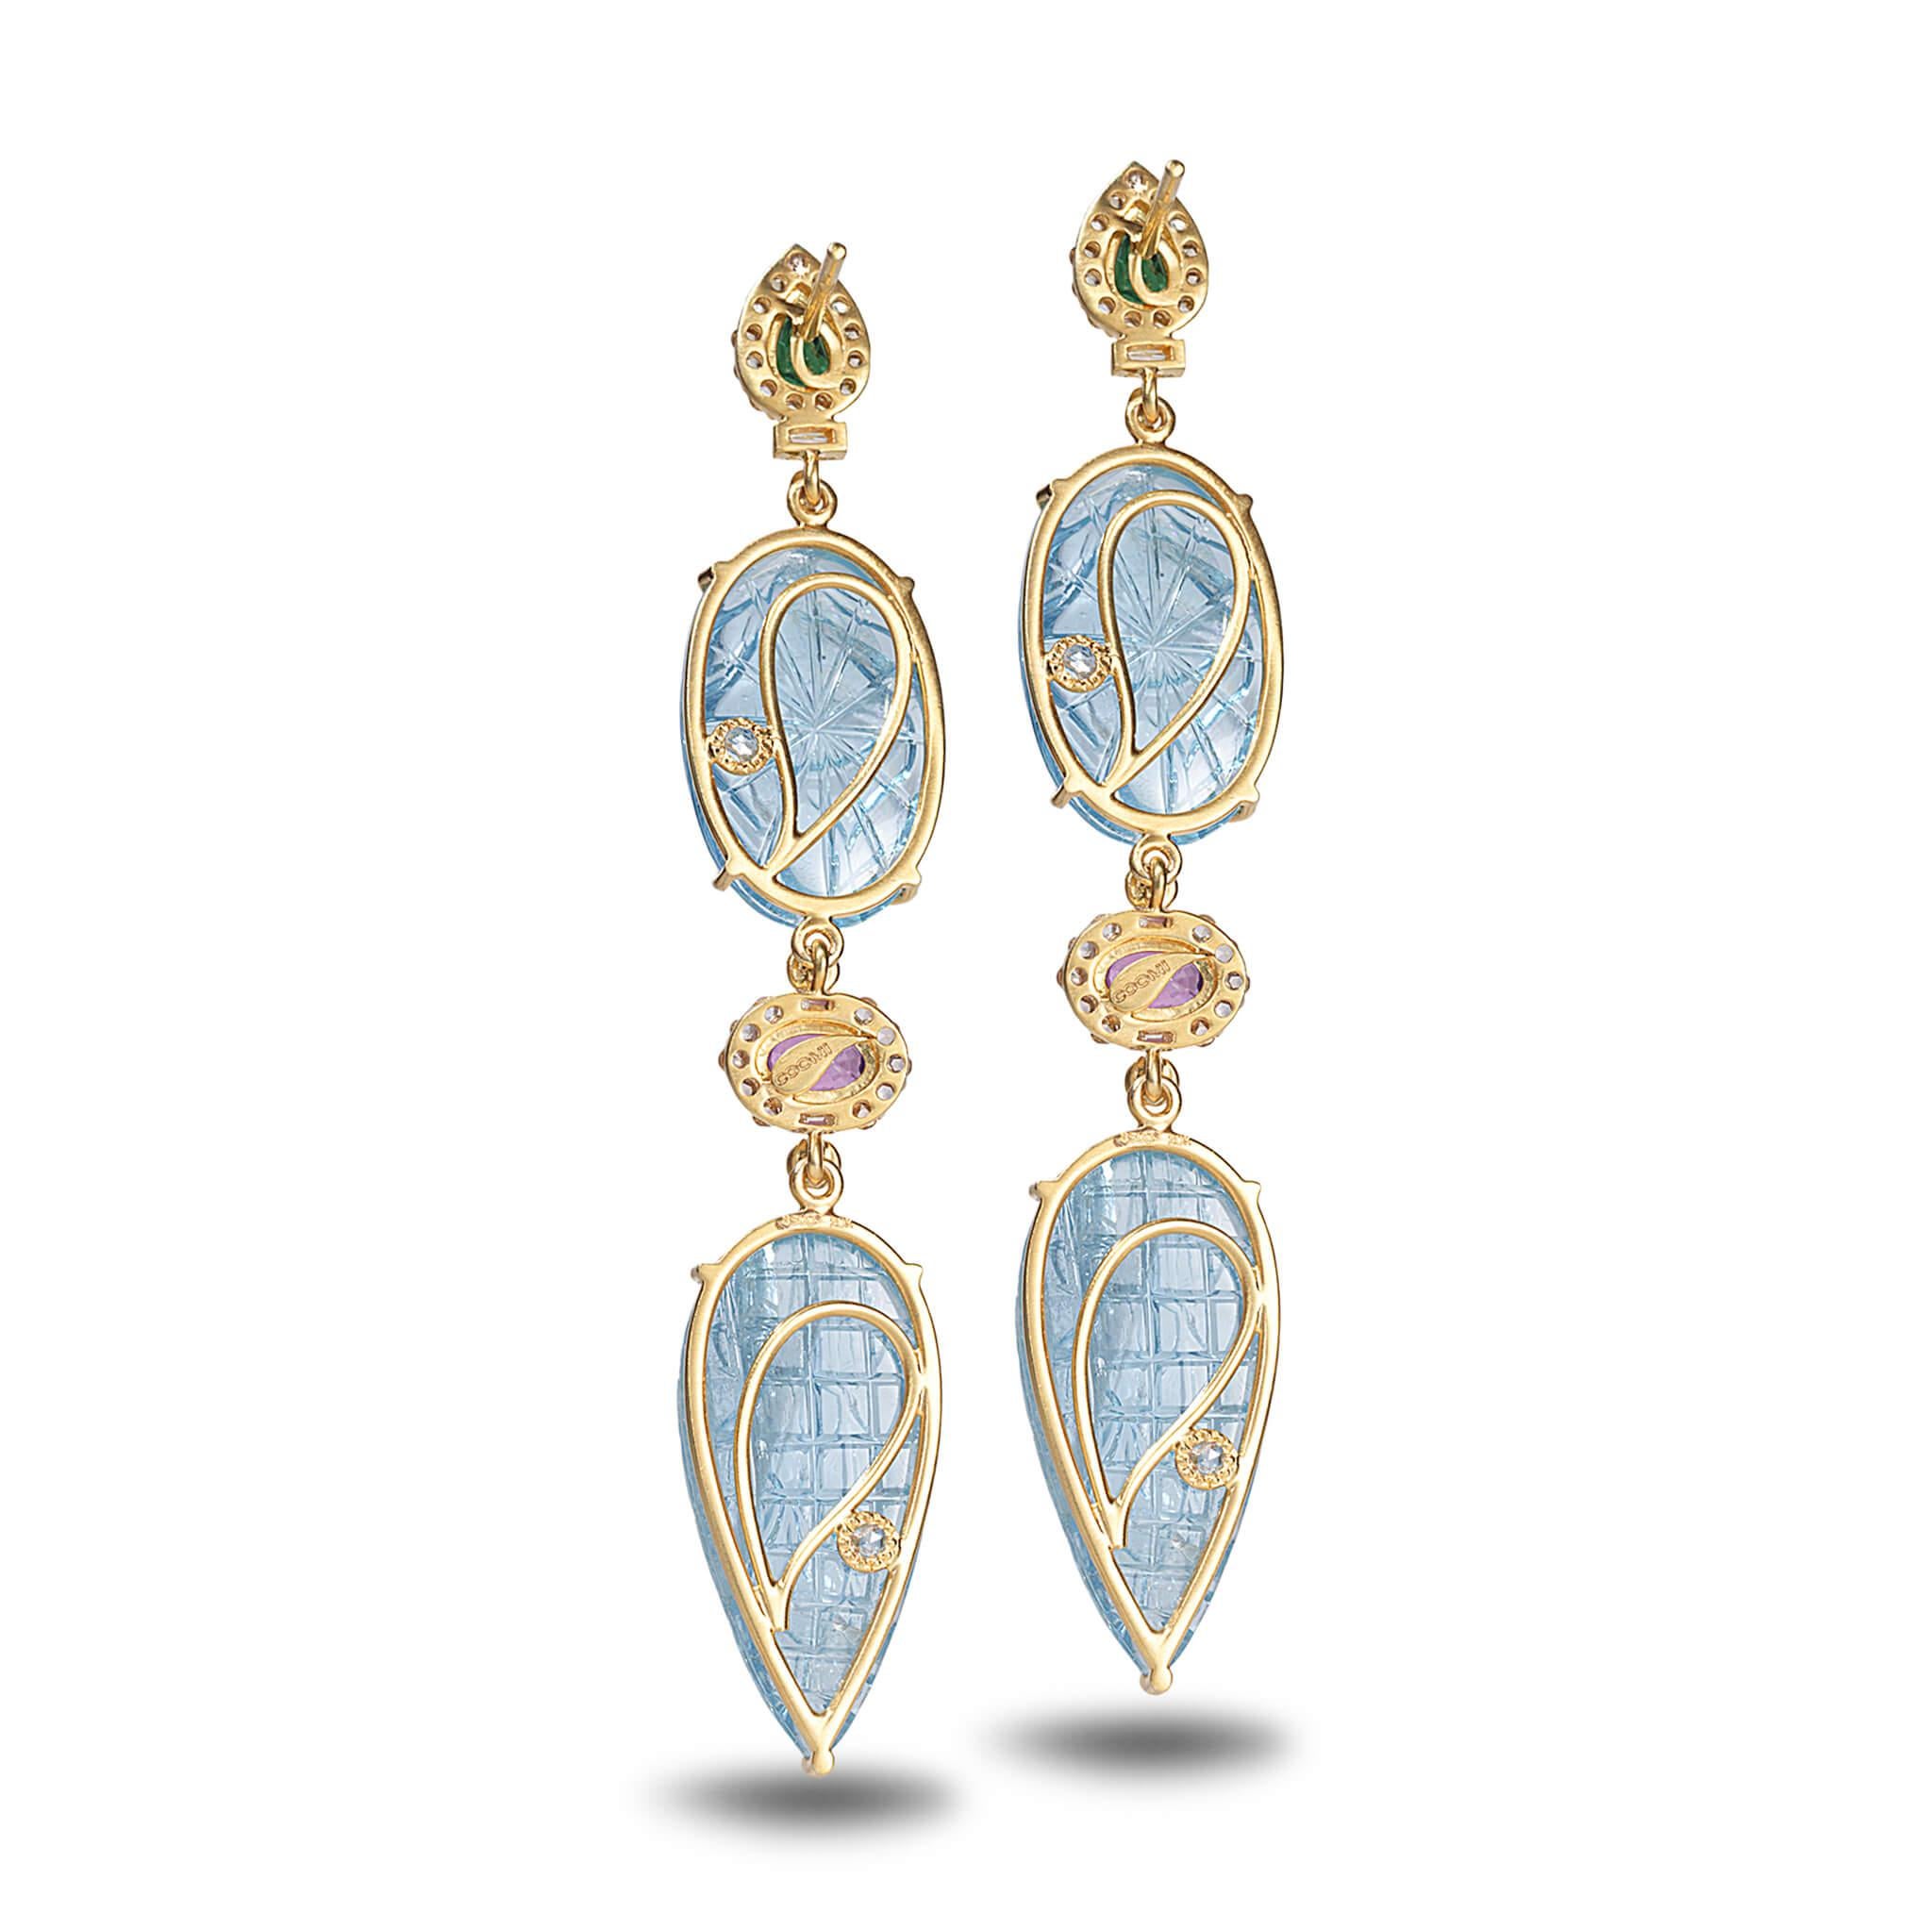 Affinity earrings set in 20K yellow gold with 44.32cts hand carved aquamarine, 1.05cts pink sapphire, 1.01cts diamond, and 0.99cts tsavorite.
